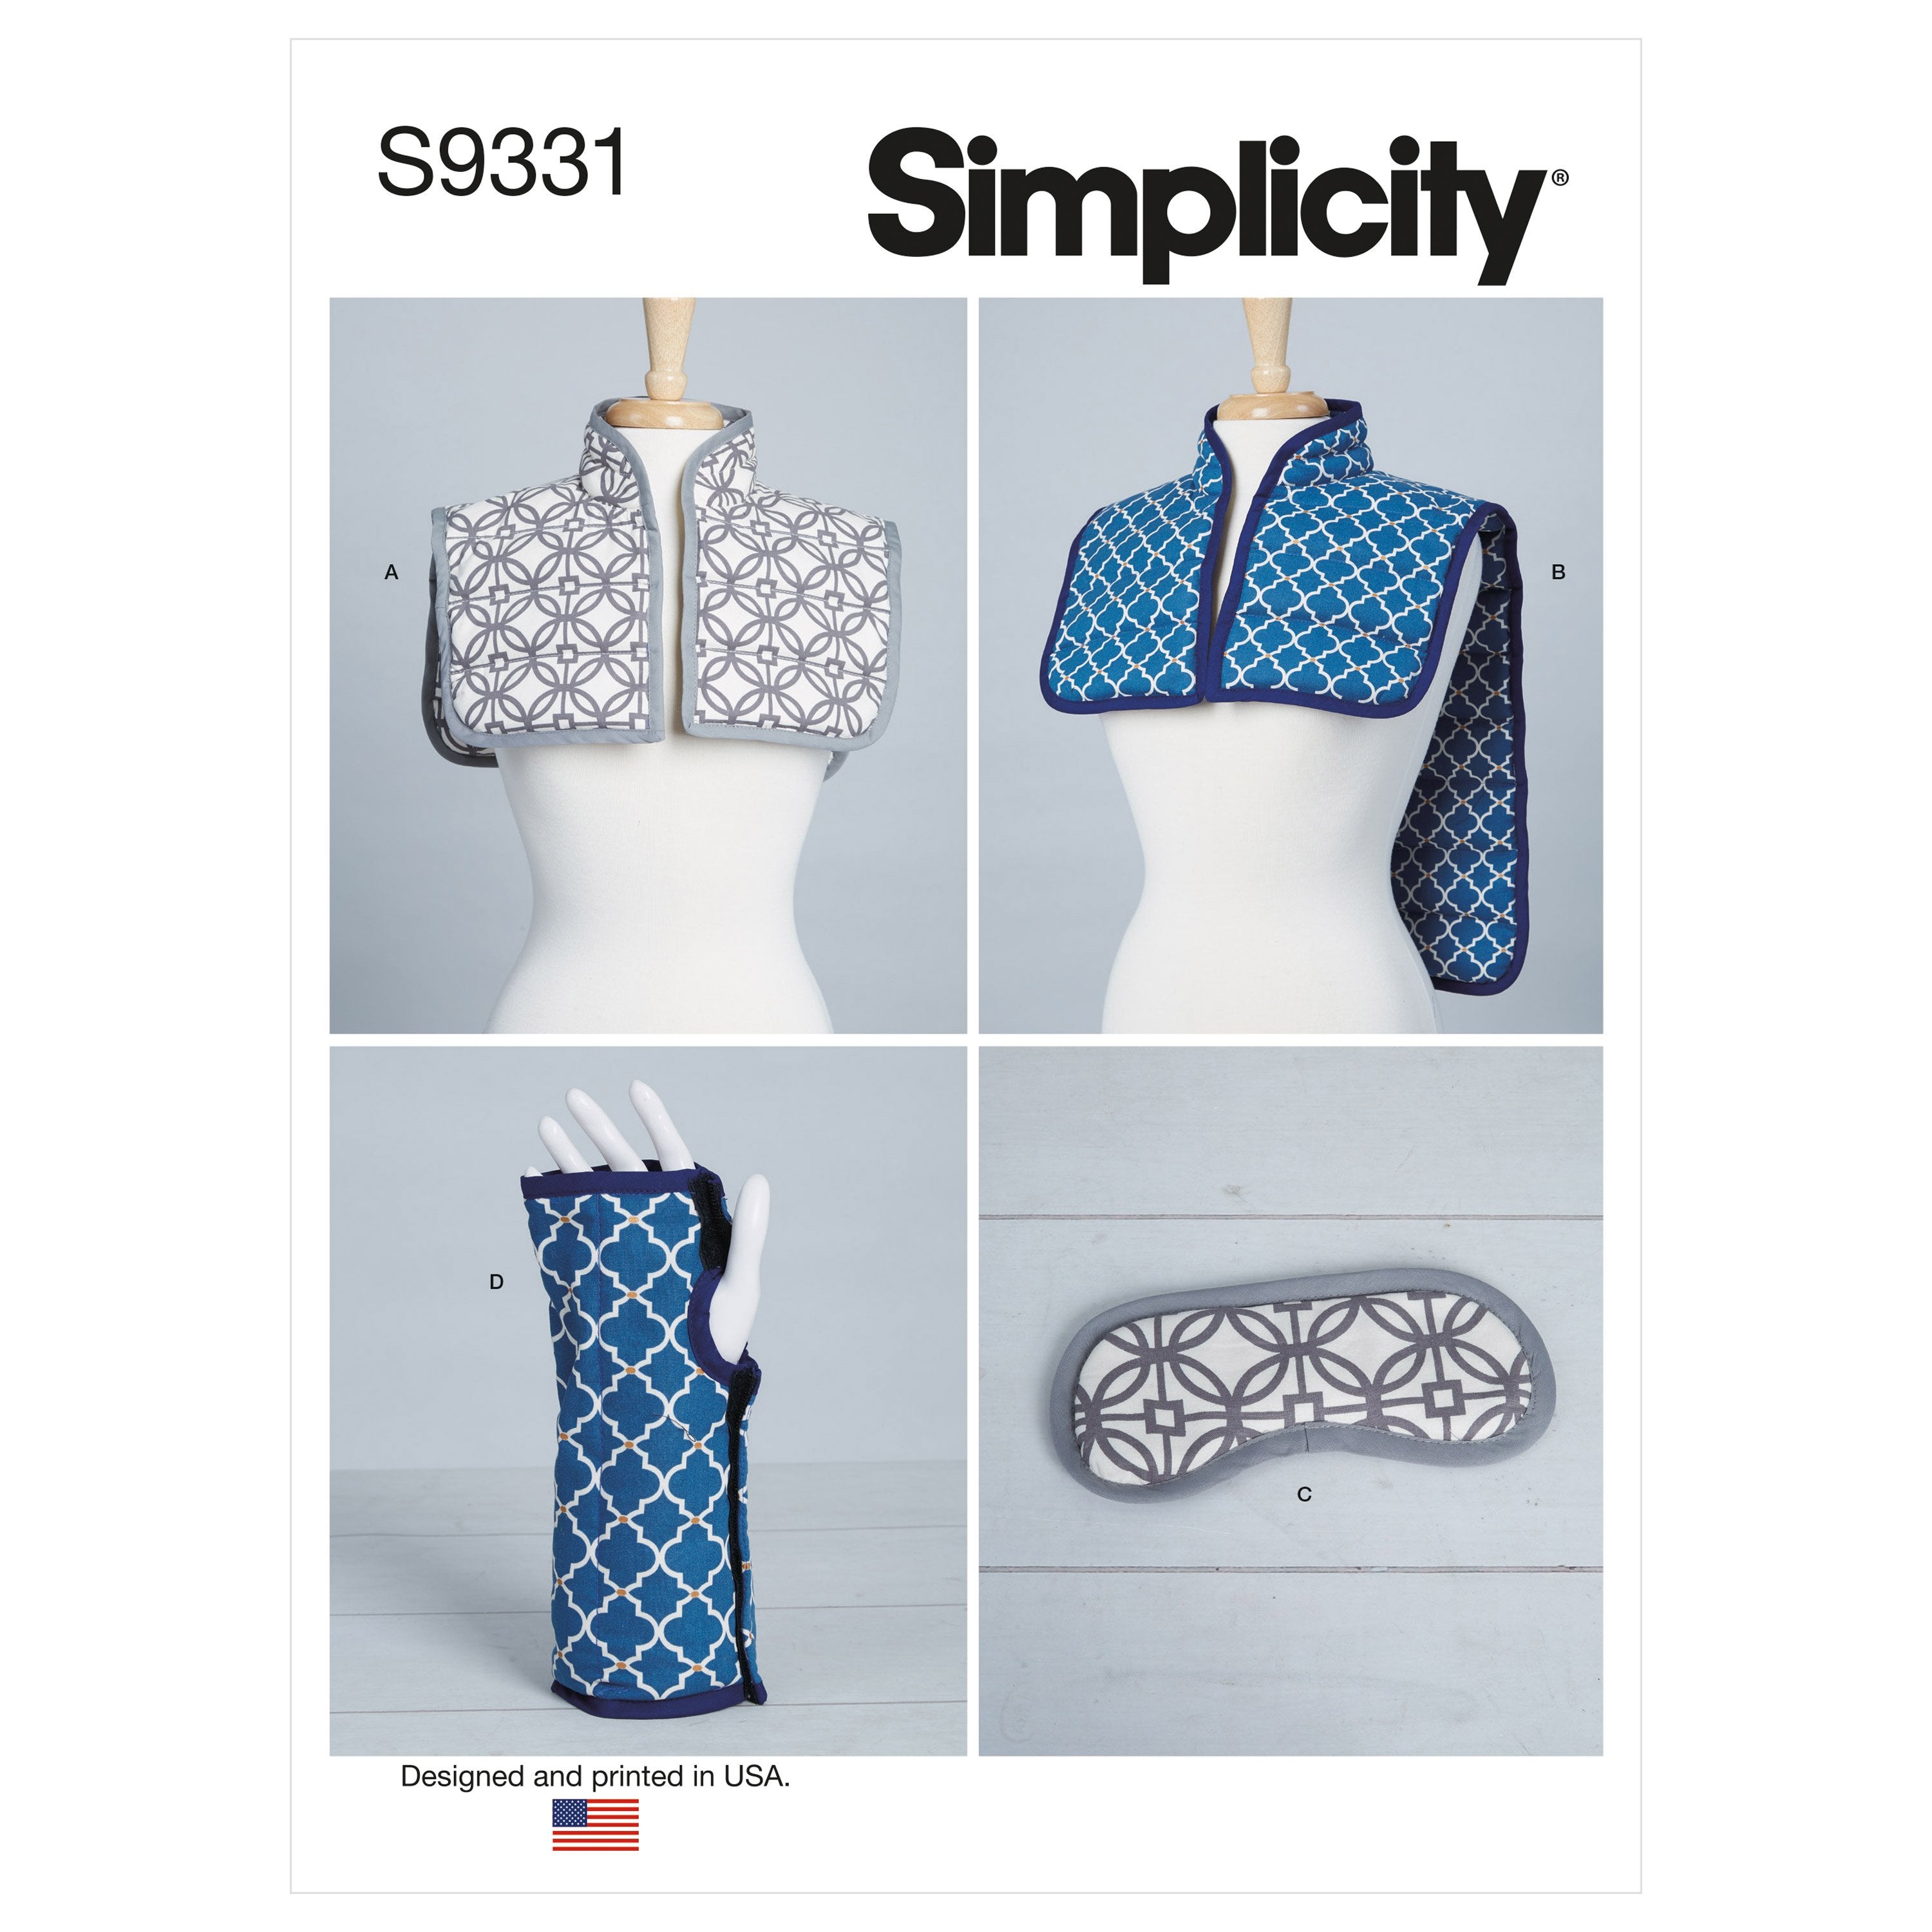 Simplicity Sewing Pattern S9331 Hot or Cold Shoulder Wrap and Mask from Jaycotts Sewing Supplies